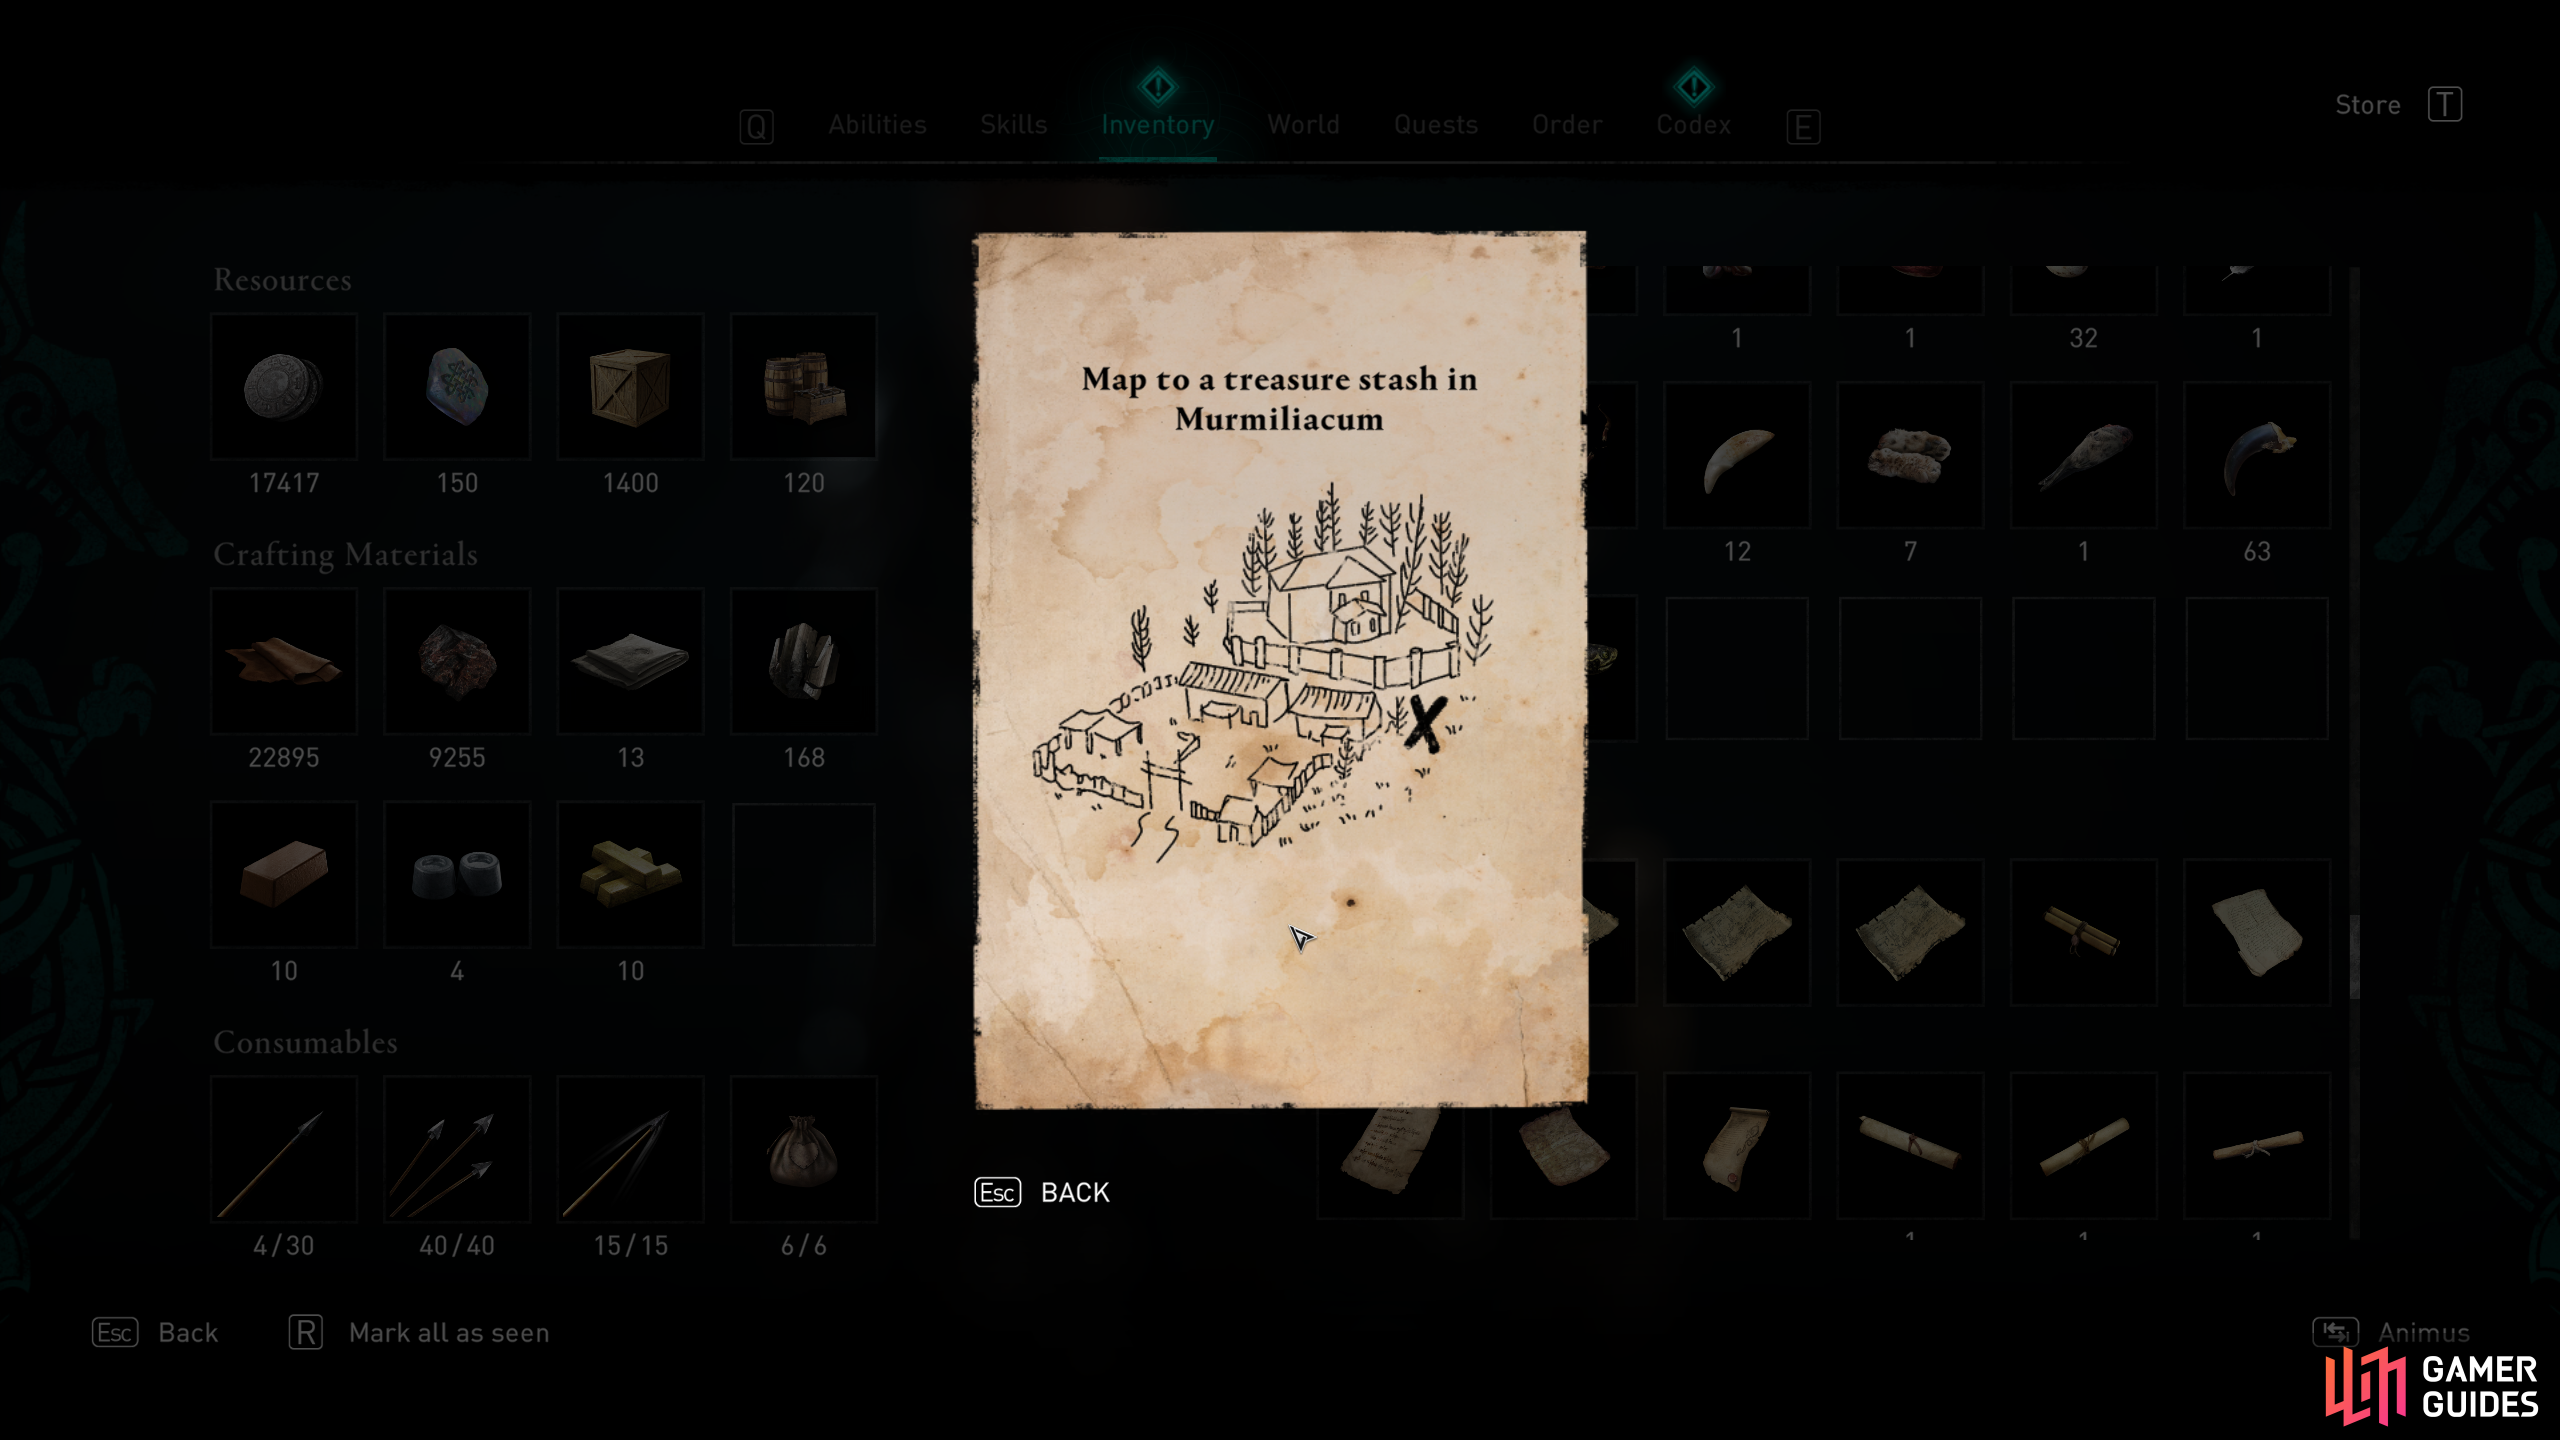 Youll find the map in your inventory, indicating where the treasure can be found.